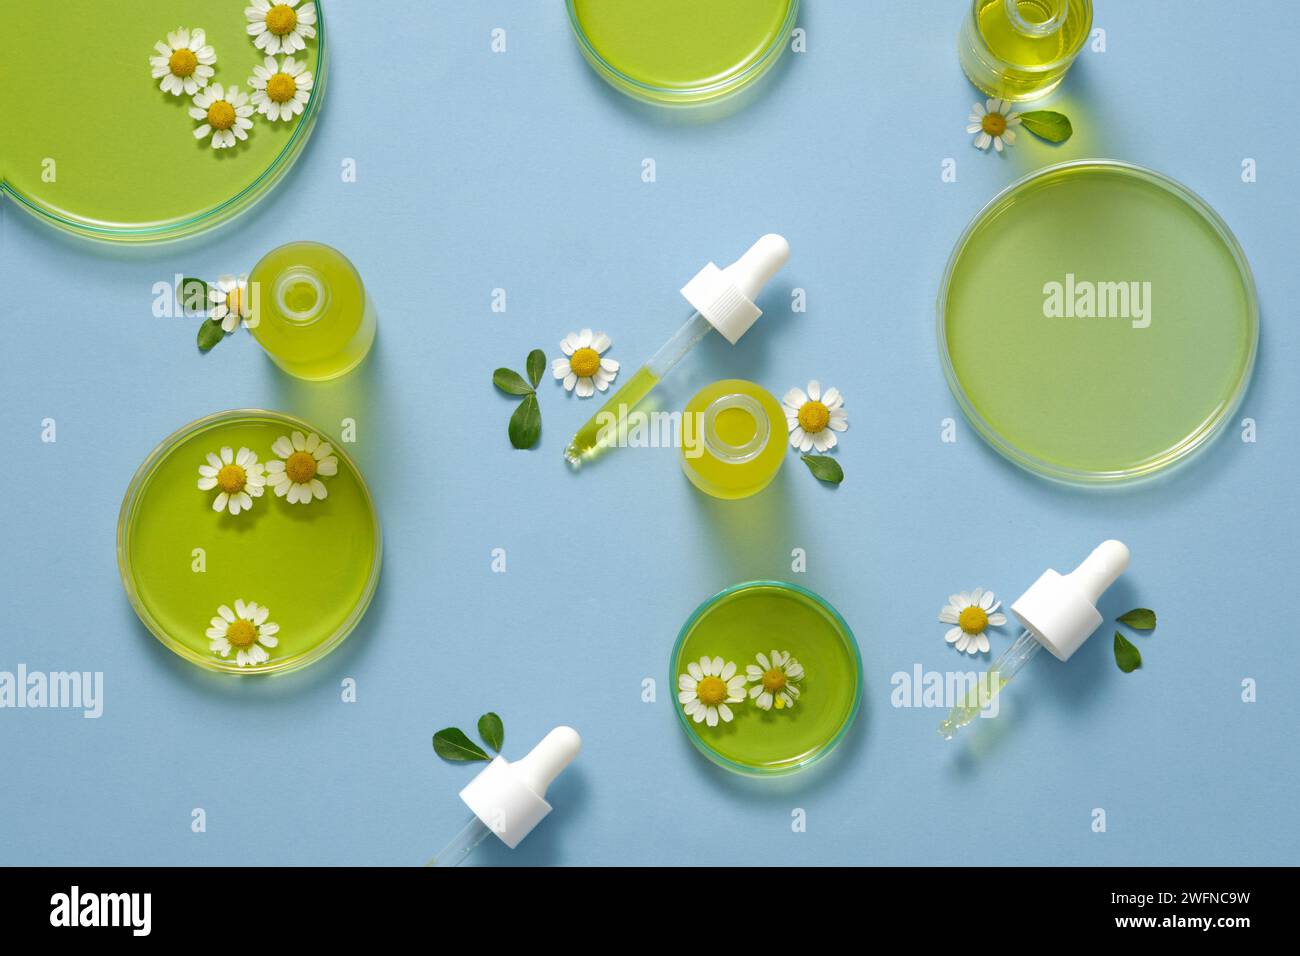 Over a blue background, some petri dishes with essence extracted from Feverfew flowers (Tanacetum parthenium) and droppers displayed on. Laboratory co Stock Photo